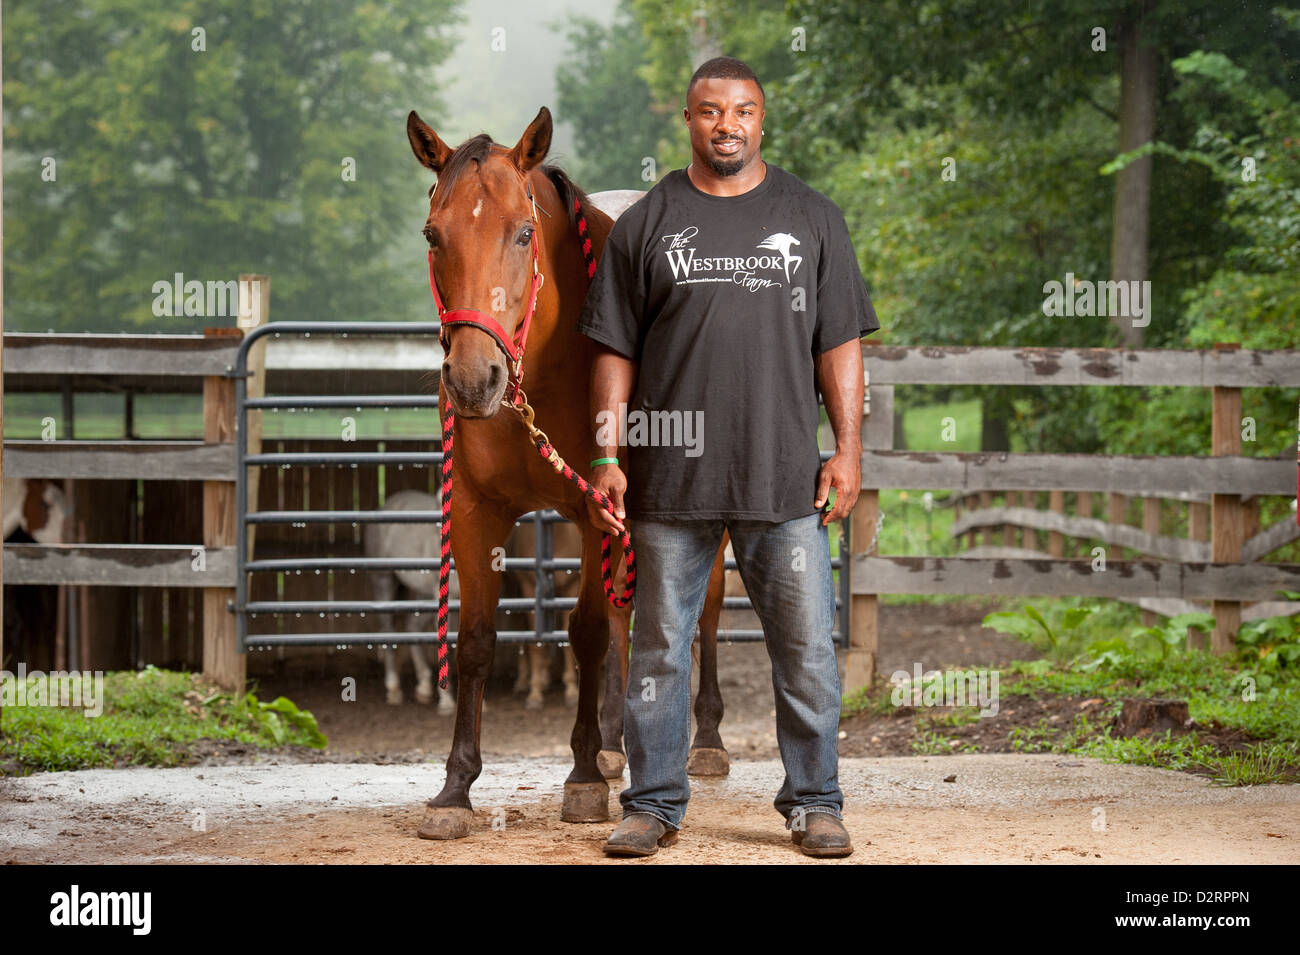 Brian Westbrook, former NFL Player and horse owner with horse in stable  Stock Photo